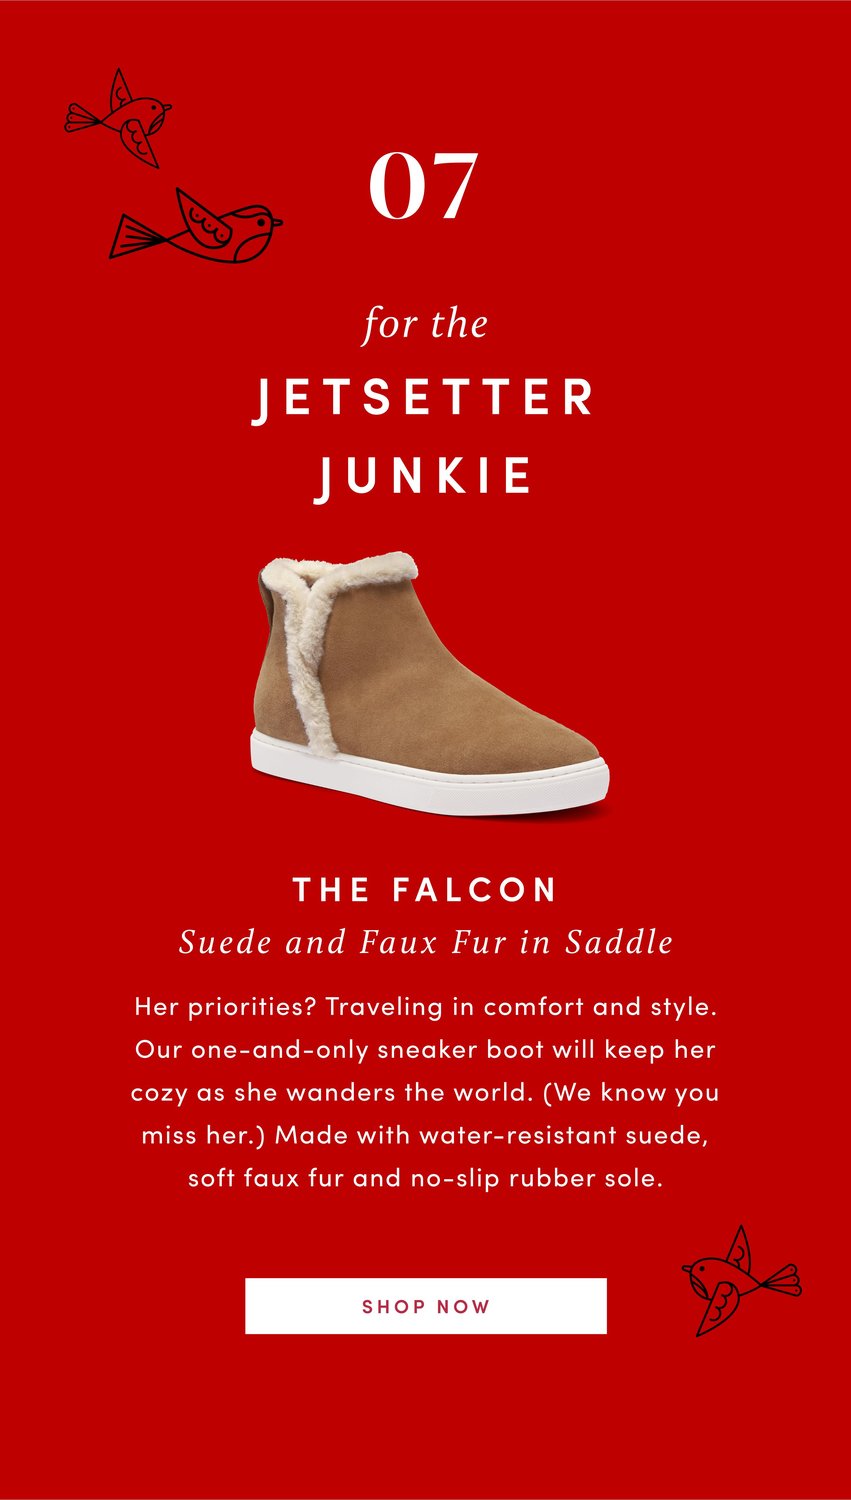 For the Jetsetter - shop The Falcon >